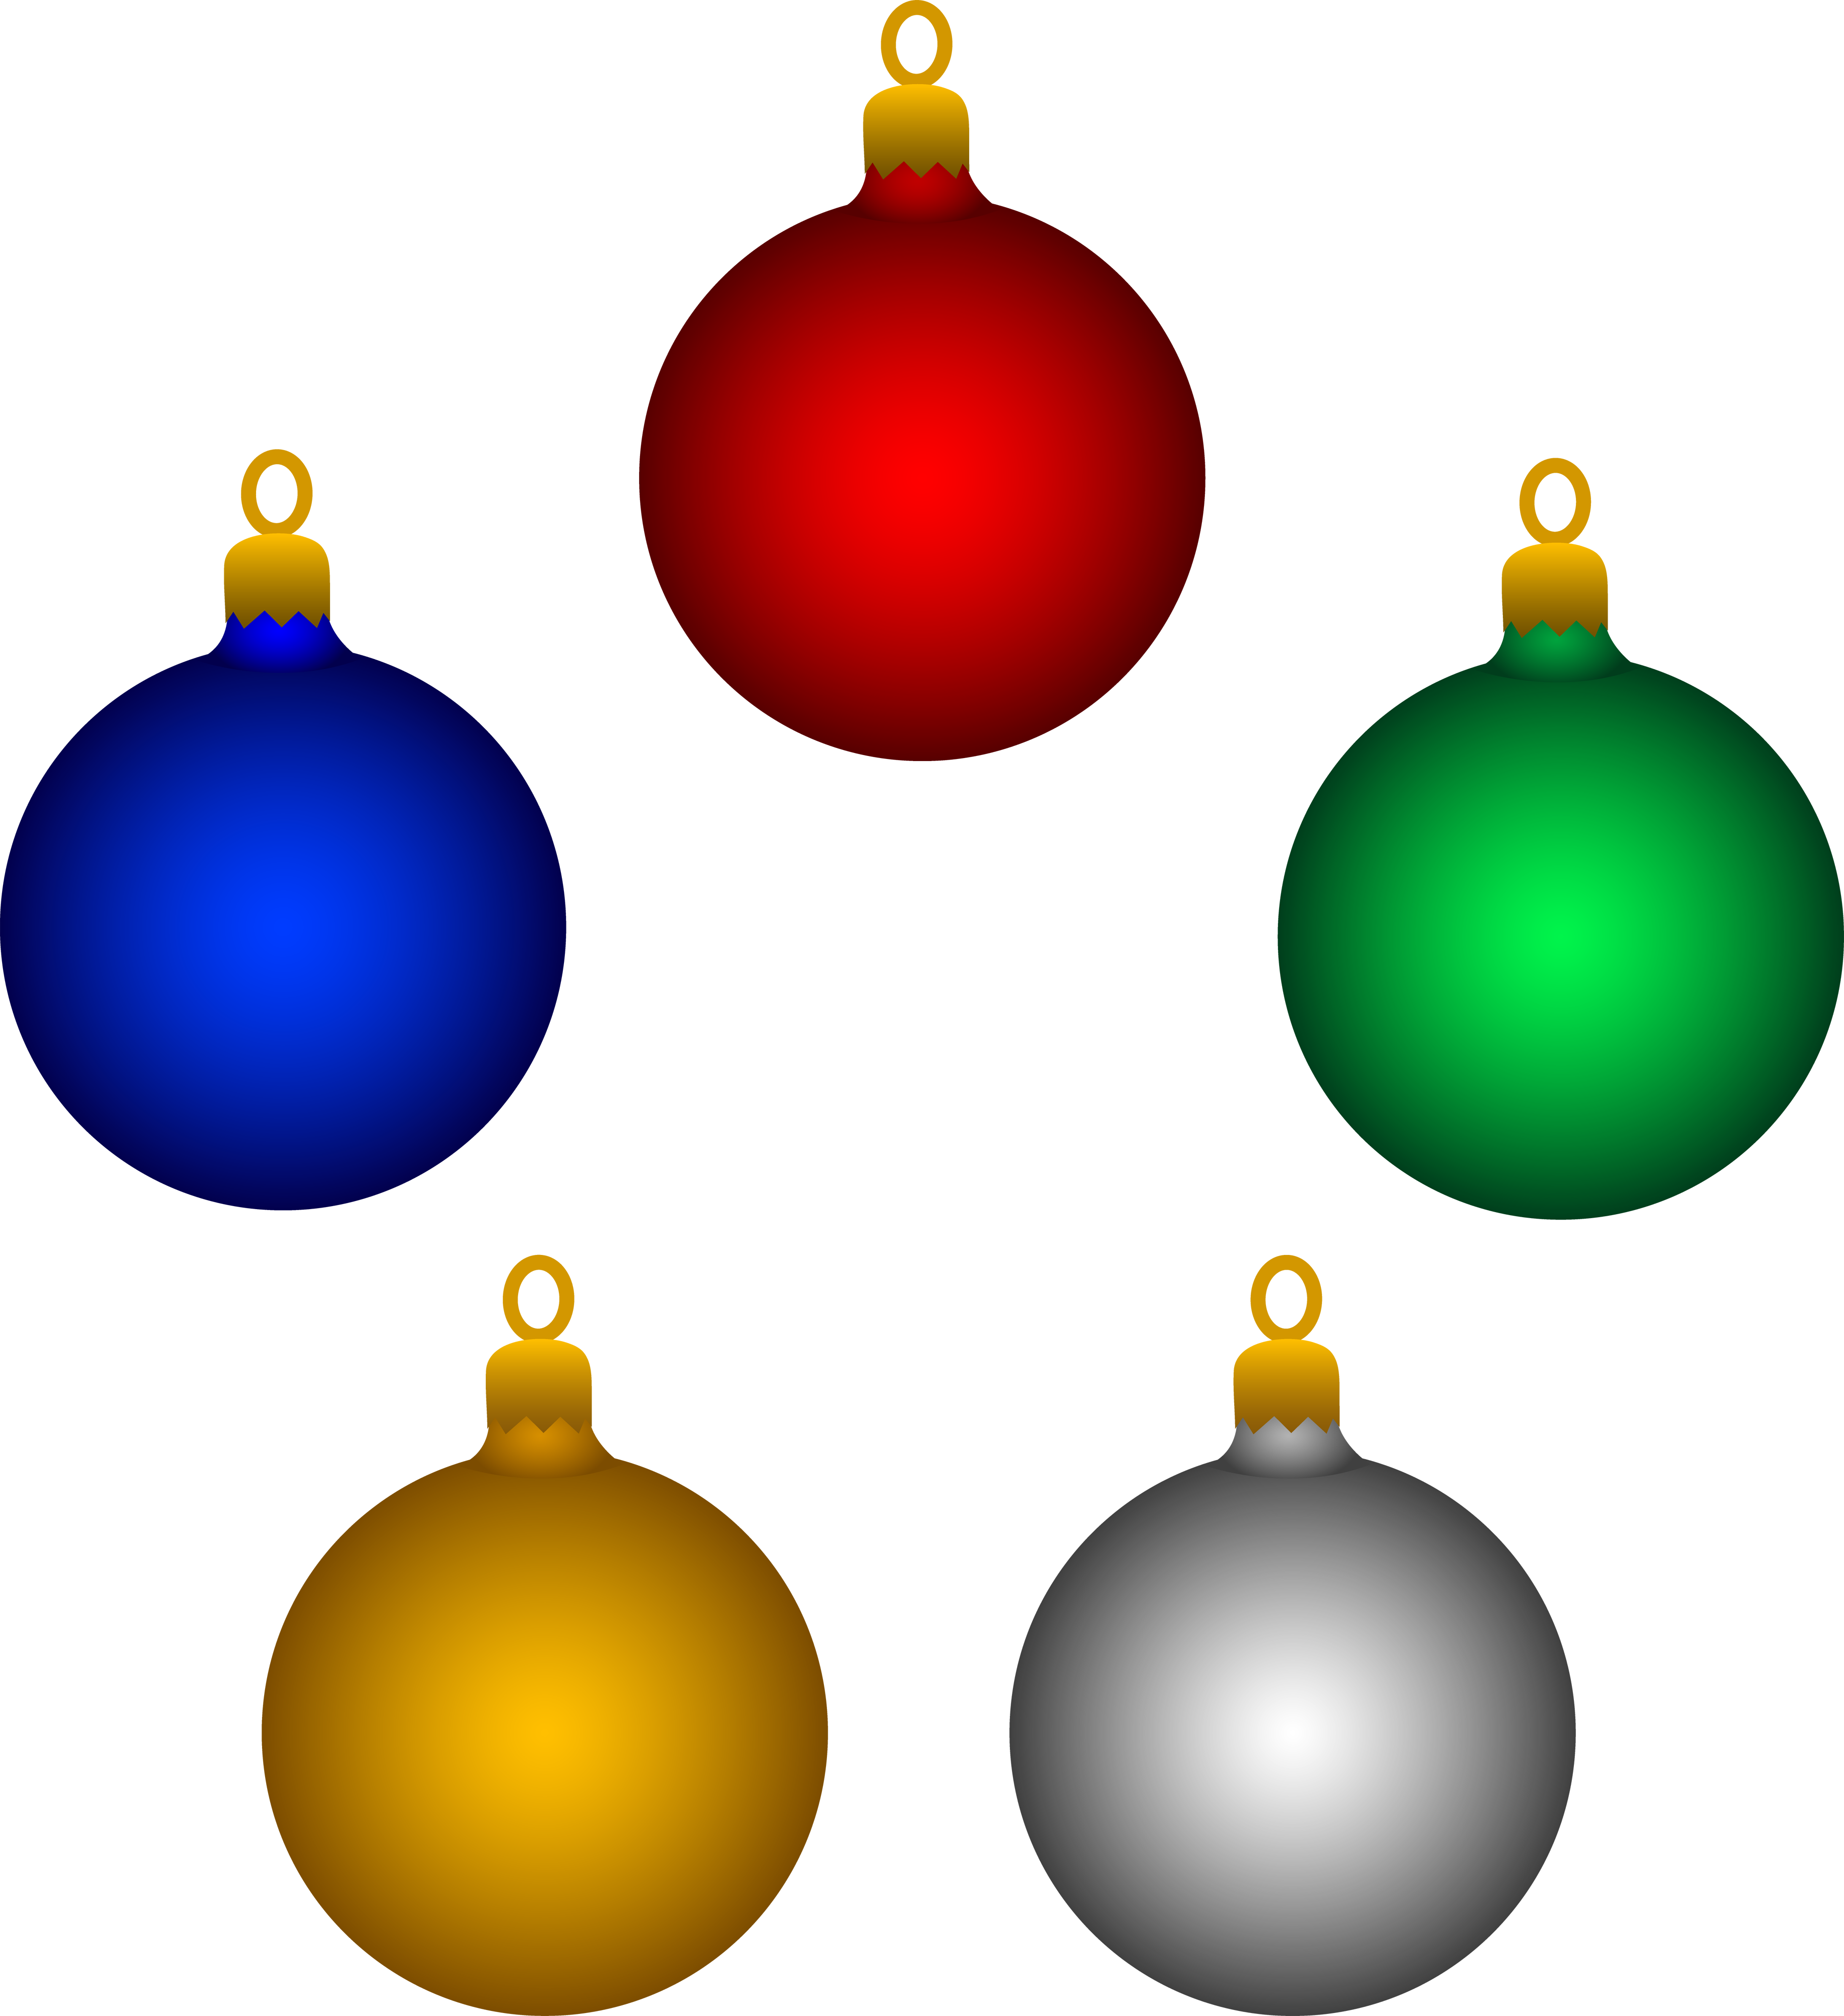 Christmas tree decorations clipart free